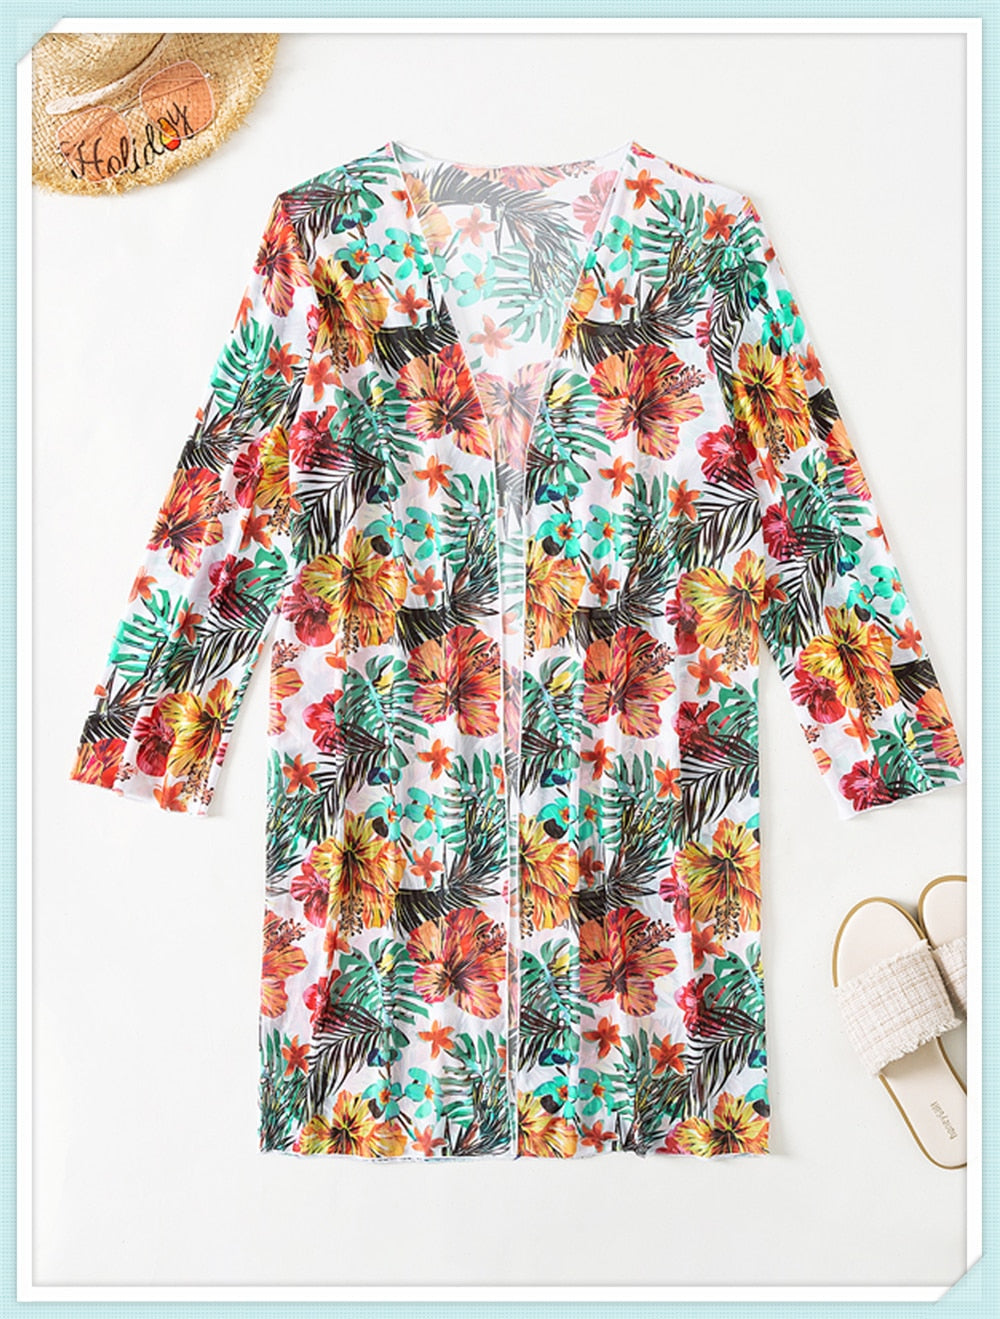 Floral Print Modest Knot Front Bikini including Cover Up Shirt  Sunset and Swim   